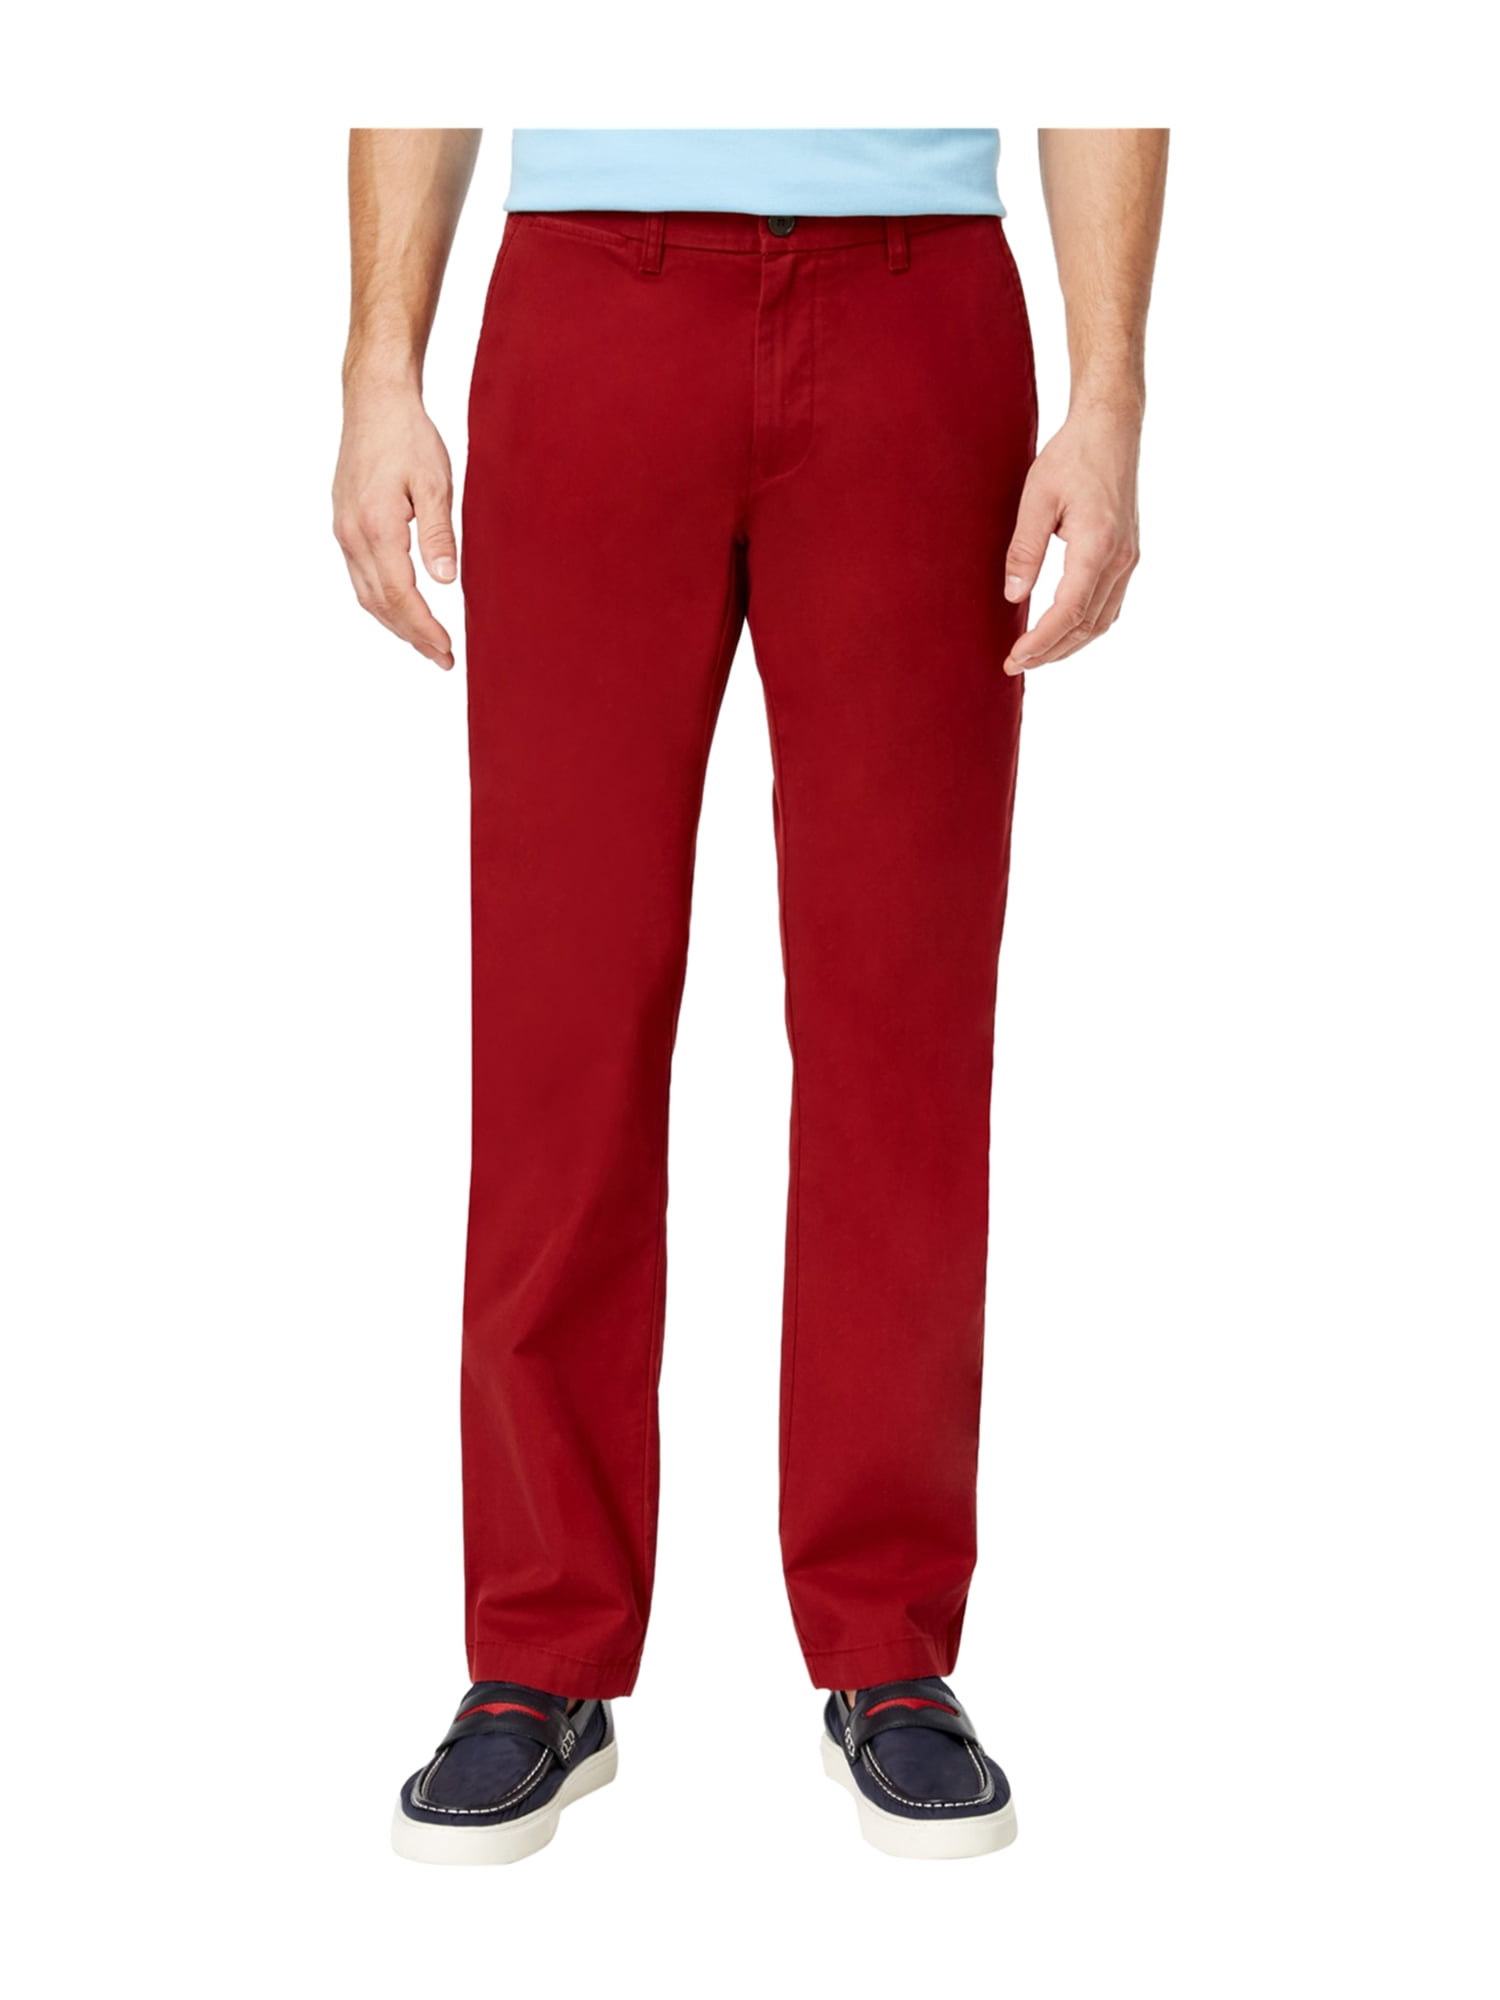 Tommy Hilfiger Mens Cotton Casual Chino Pants driedtomato 40x32 ...